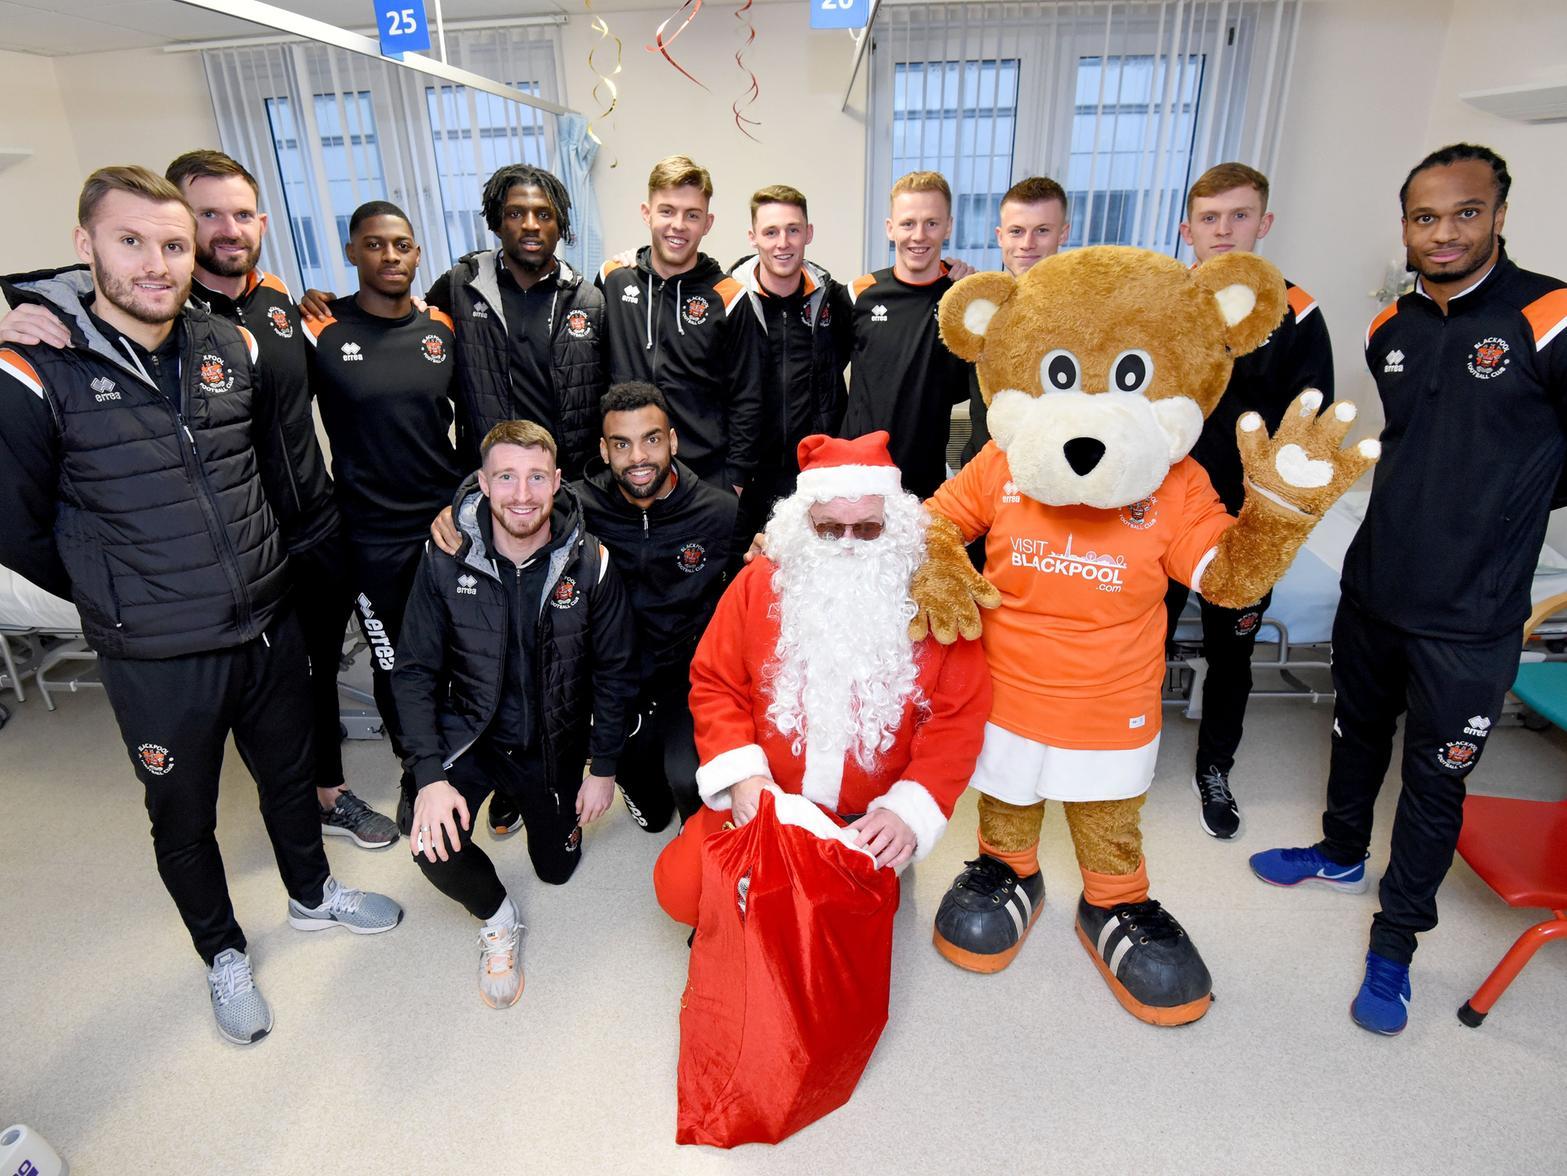 The players pose for a picture with Father Christmas and Bloomfield Bear on the children's ward